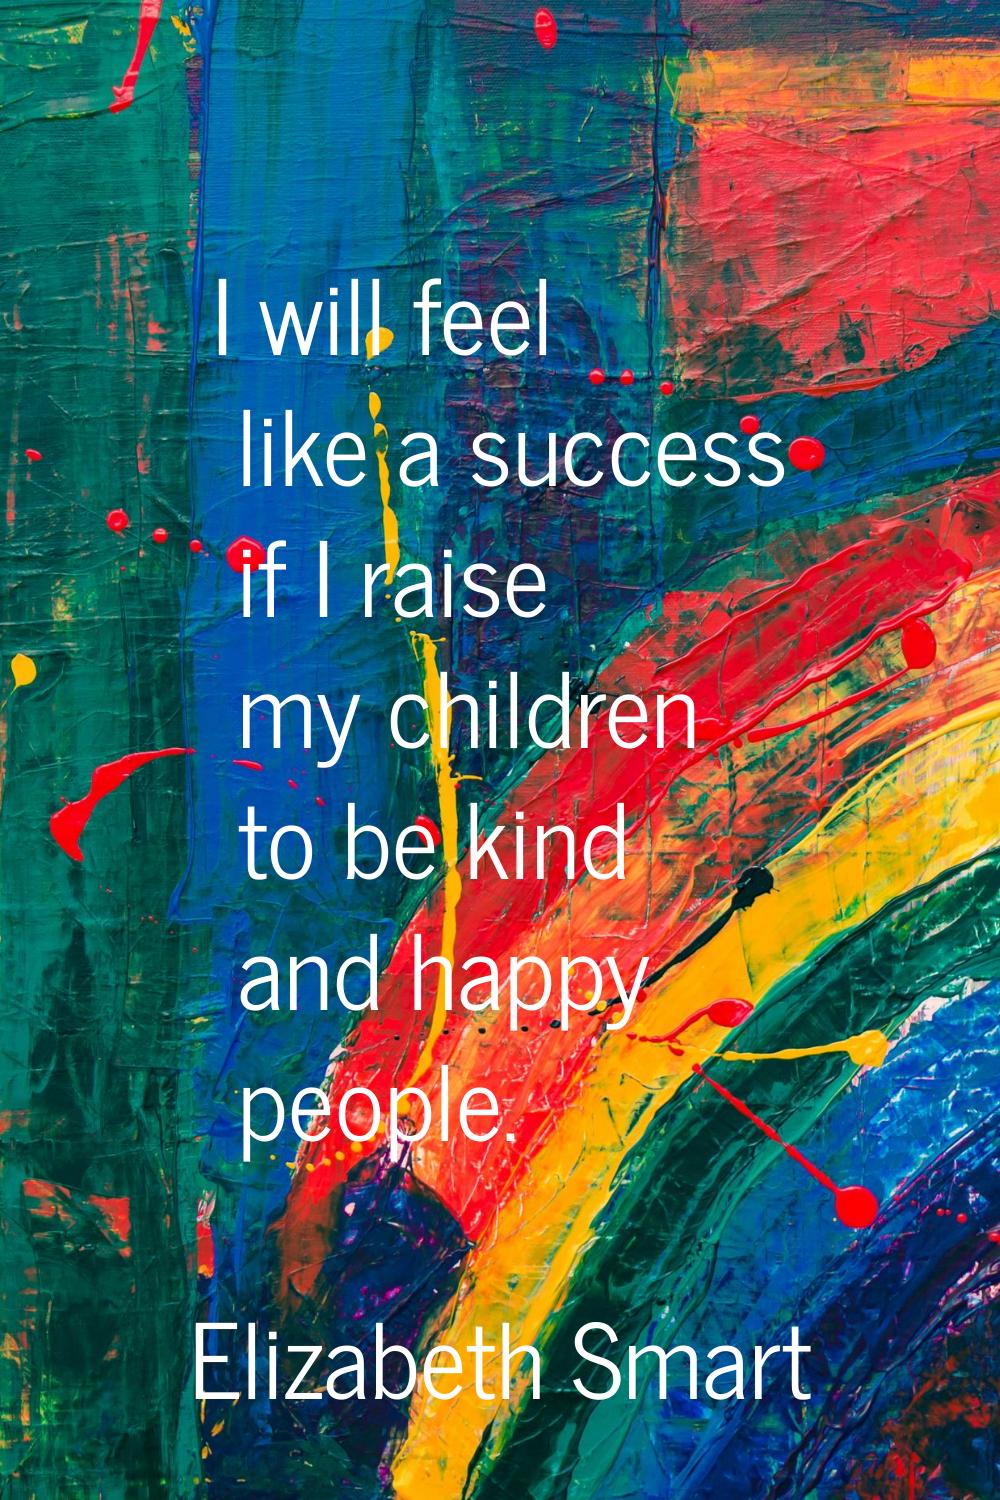 I will feel like a success if I raise my children to be kind and happy people.